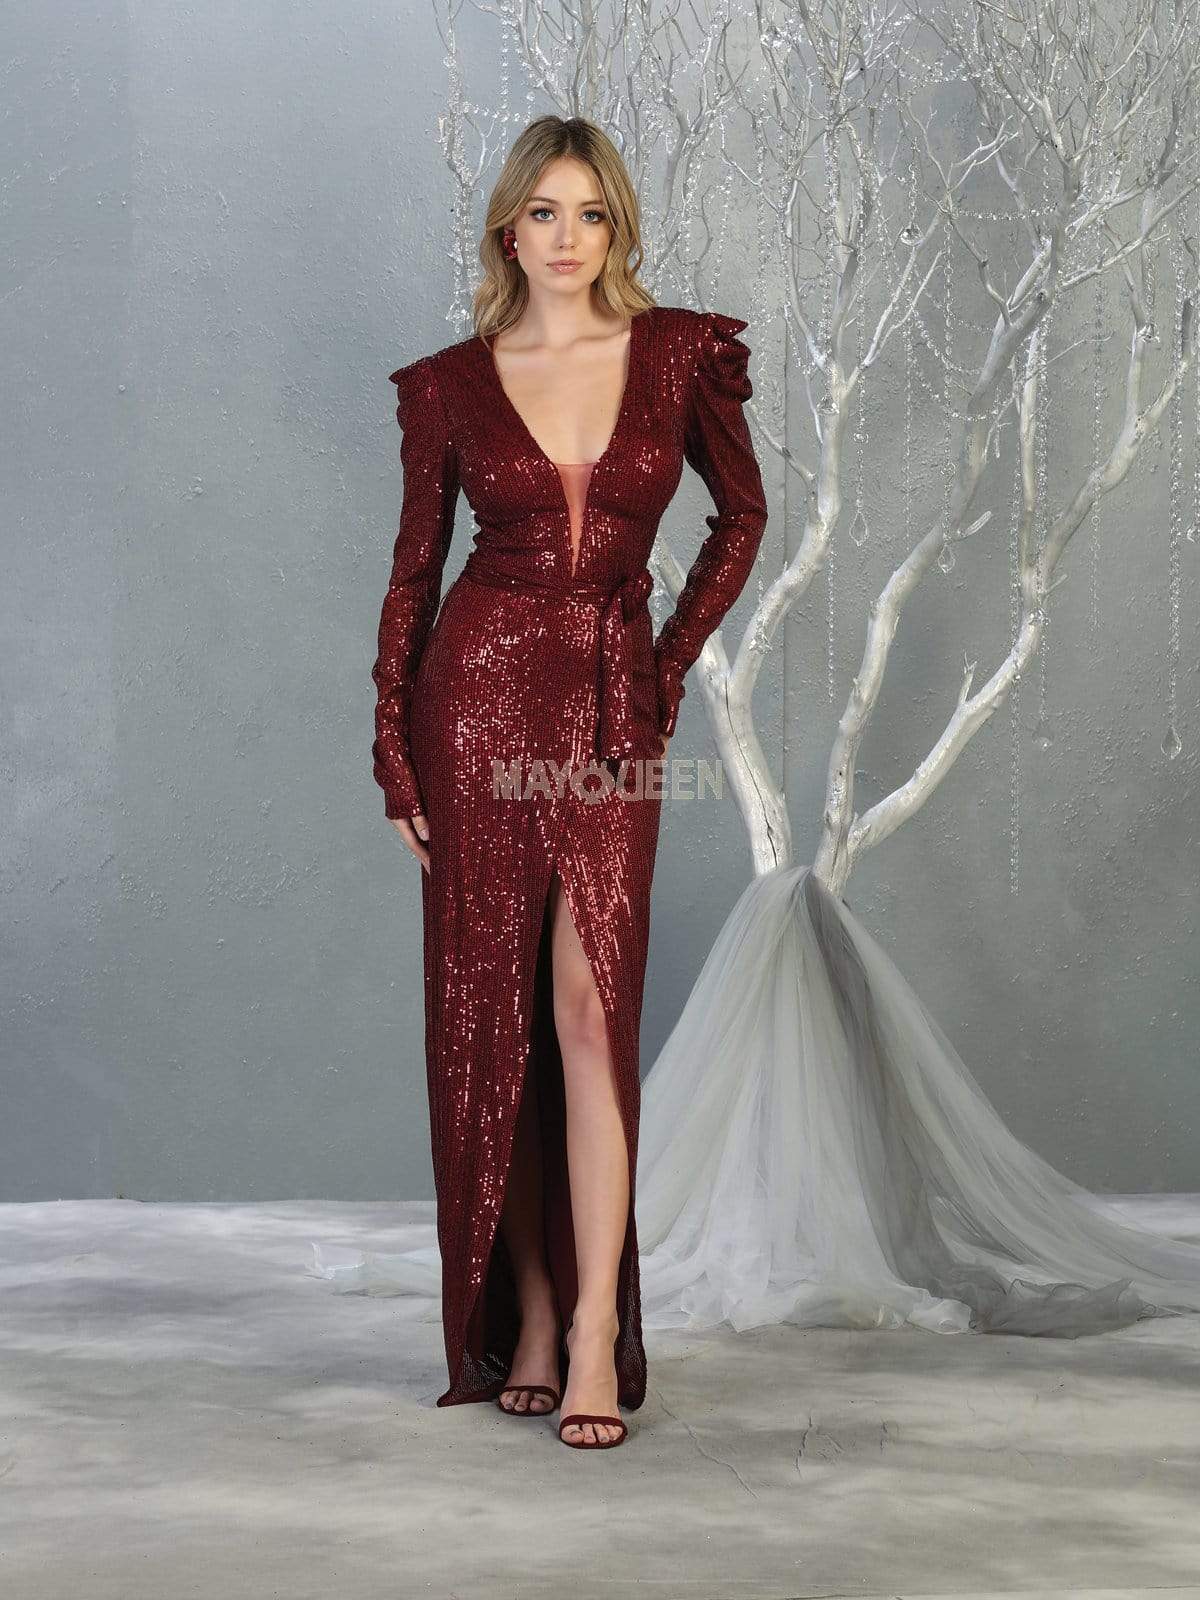 May Queen - MQ1821 Sequin Embellished Gown with Slit Evening Dresses 4 / Burgundy